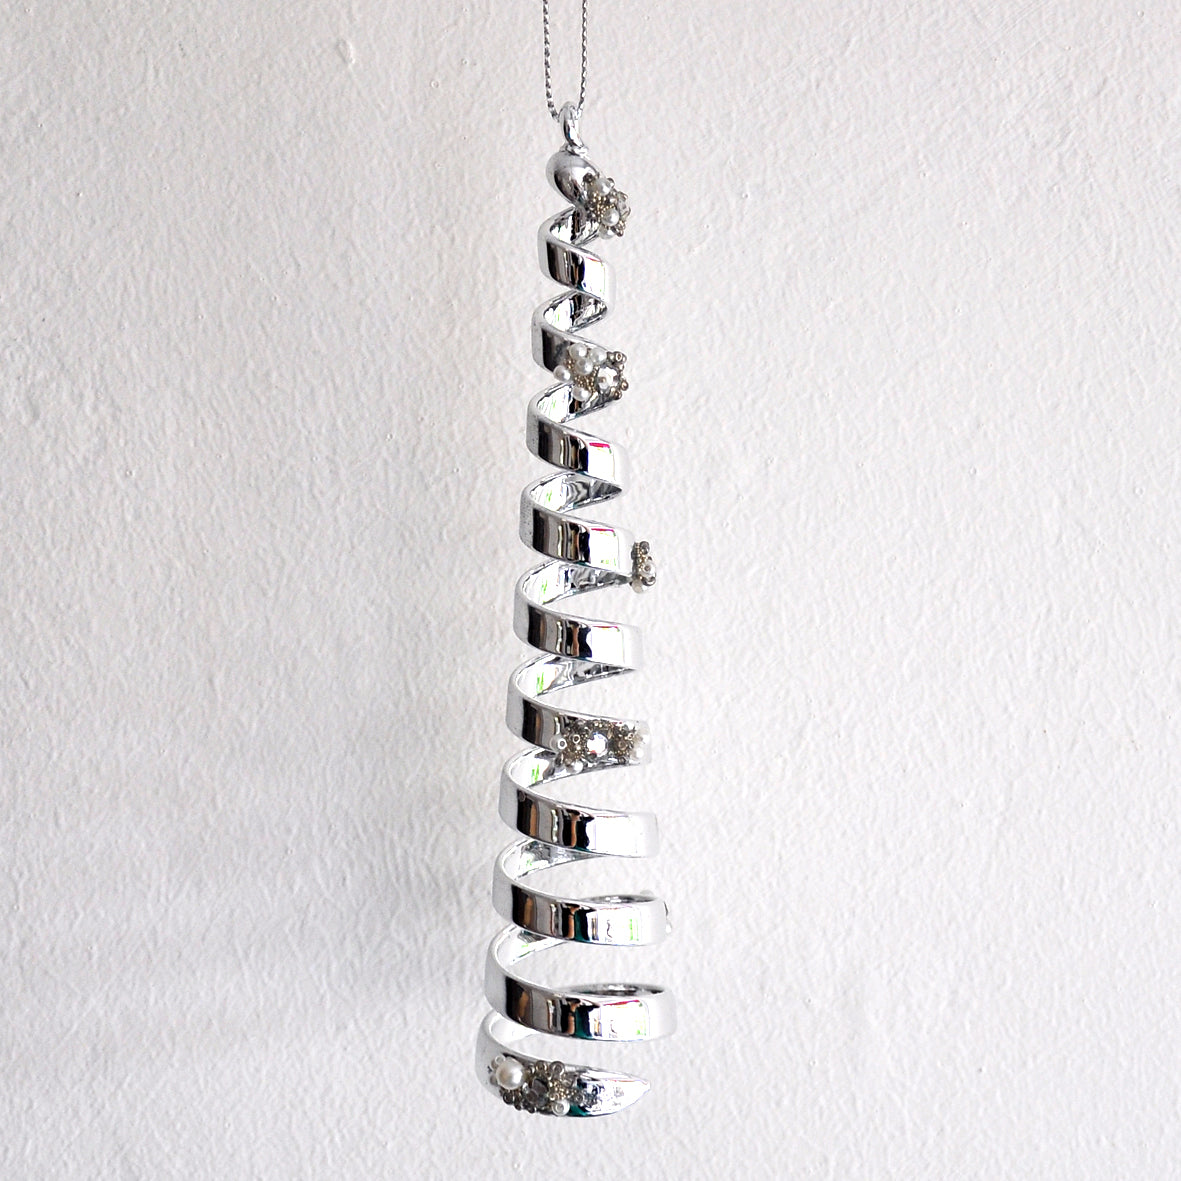 This striking silver spiral is made from glass and decorated with diamonte, beads and pearls.